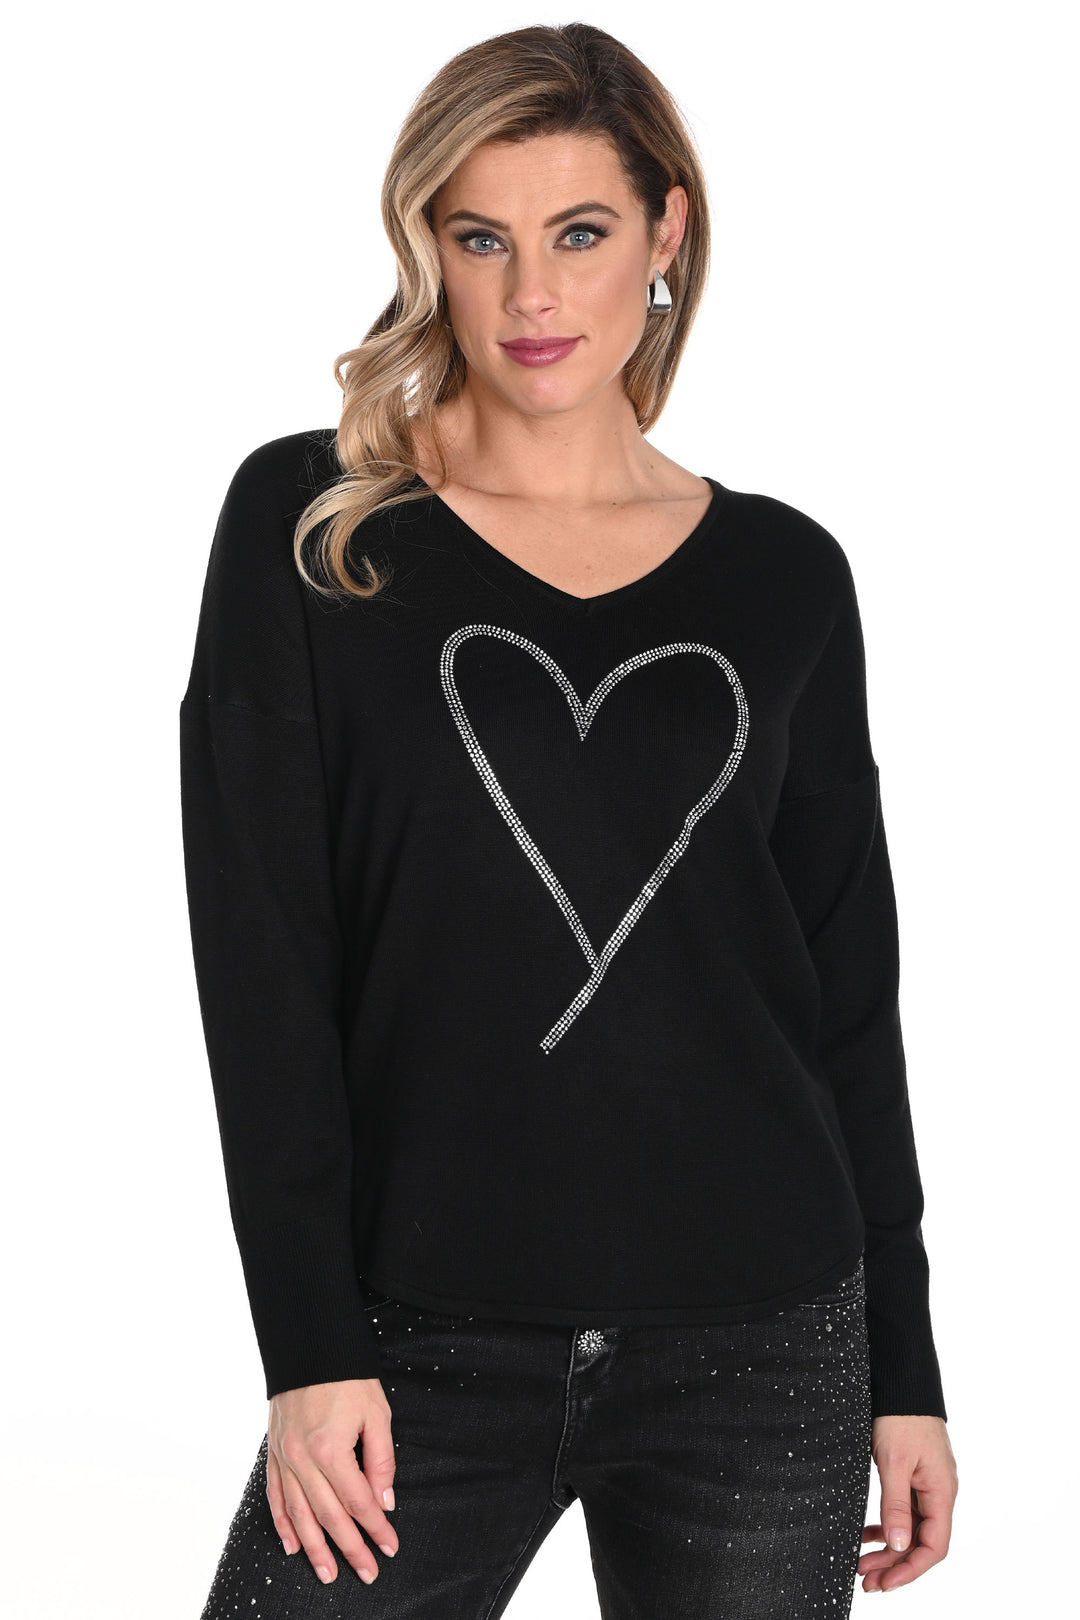 Frank Lyman Fall 2024  This cute top features a bling heart print that adds a touch of charm and playfulness! The long sleeves and flattering fit make it perfect for any occasion. 